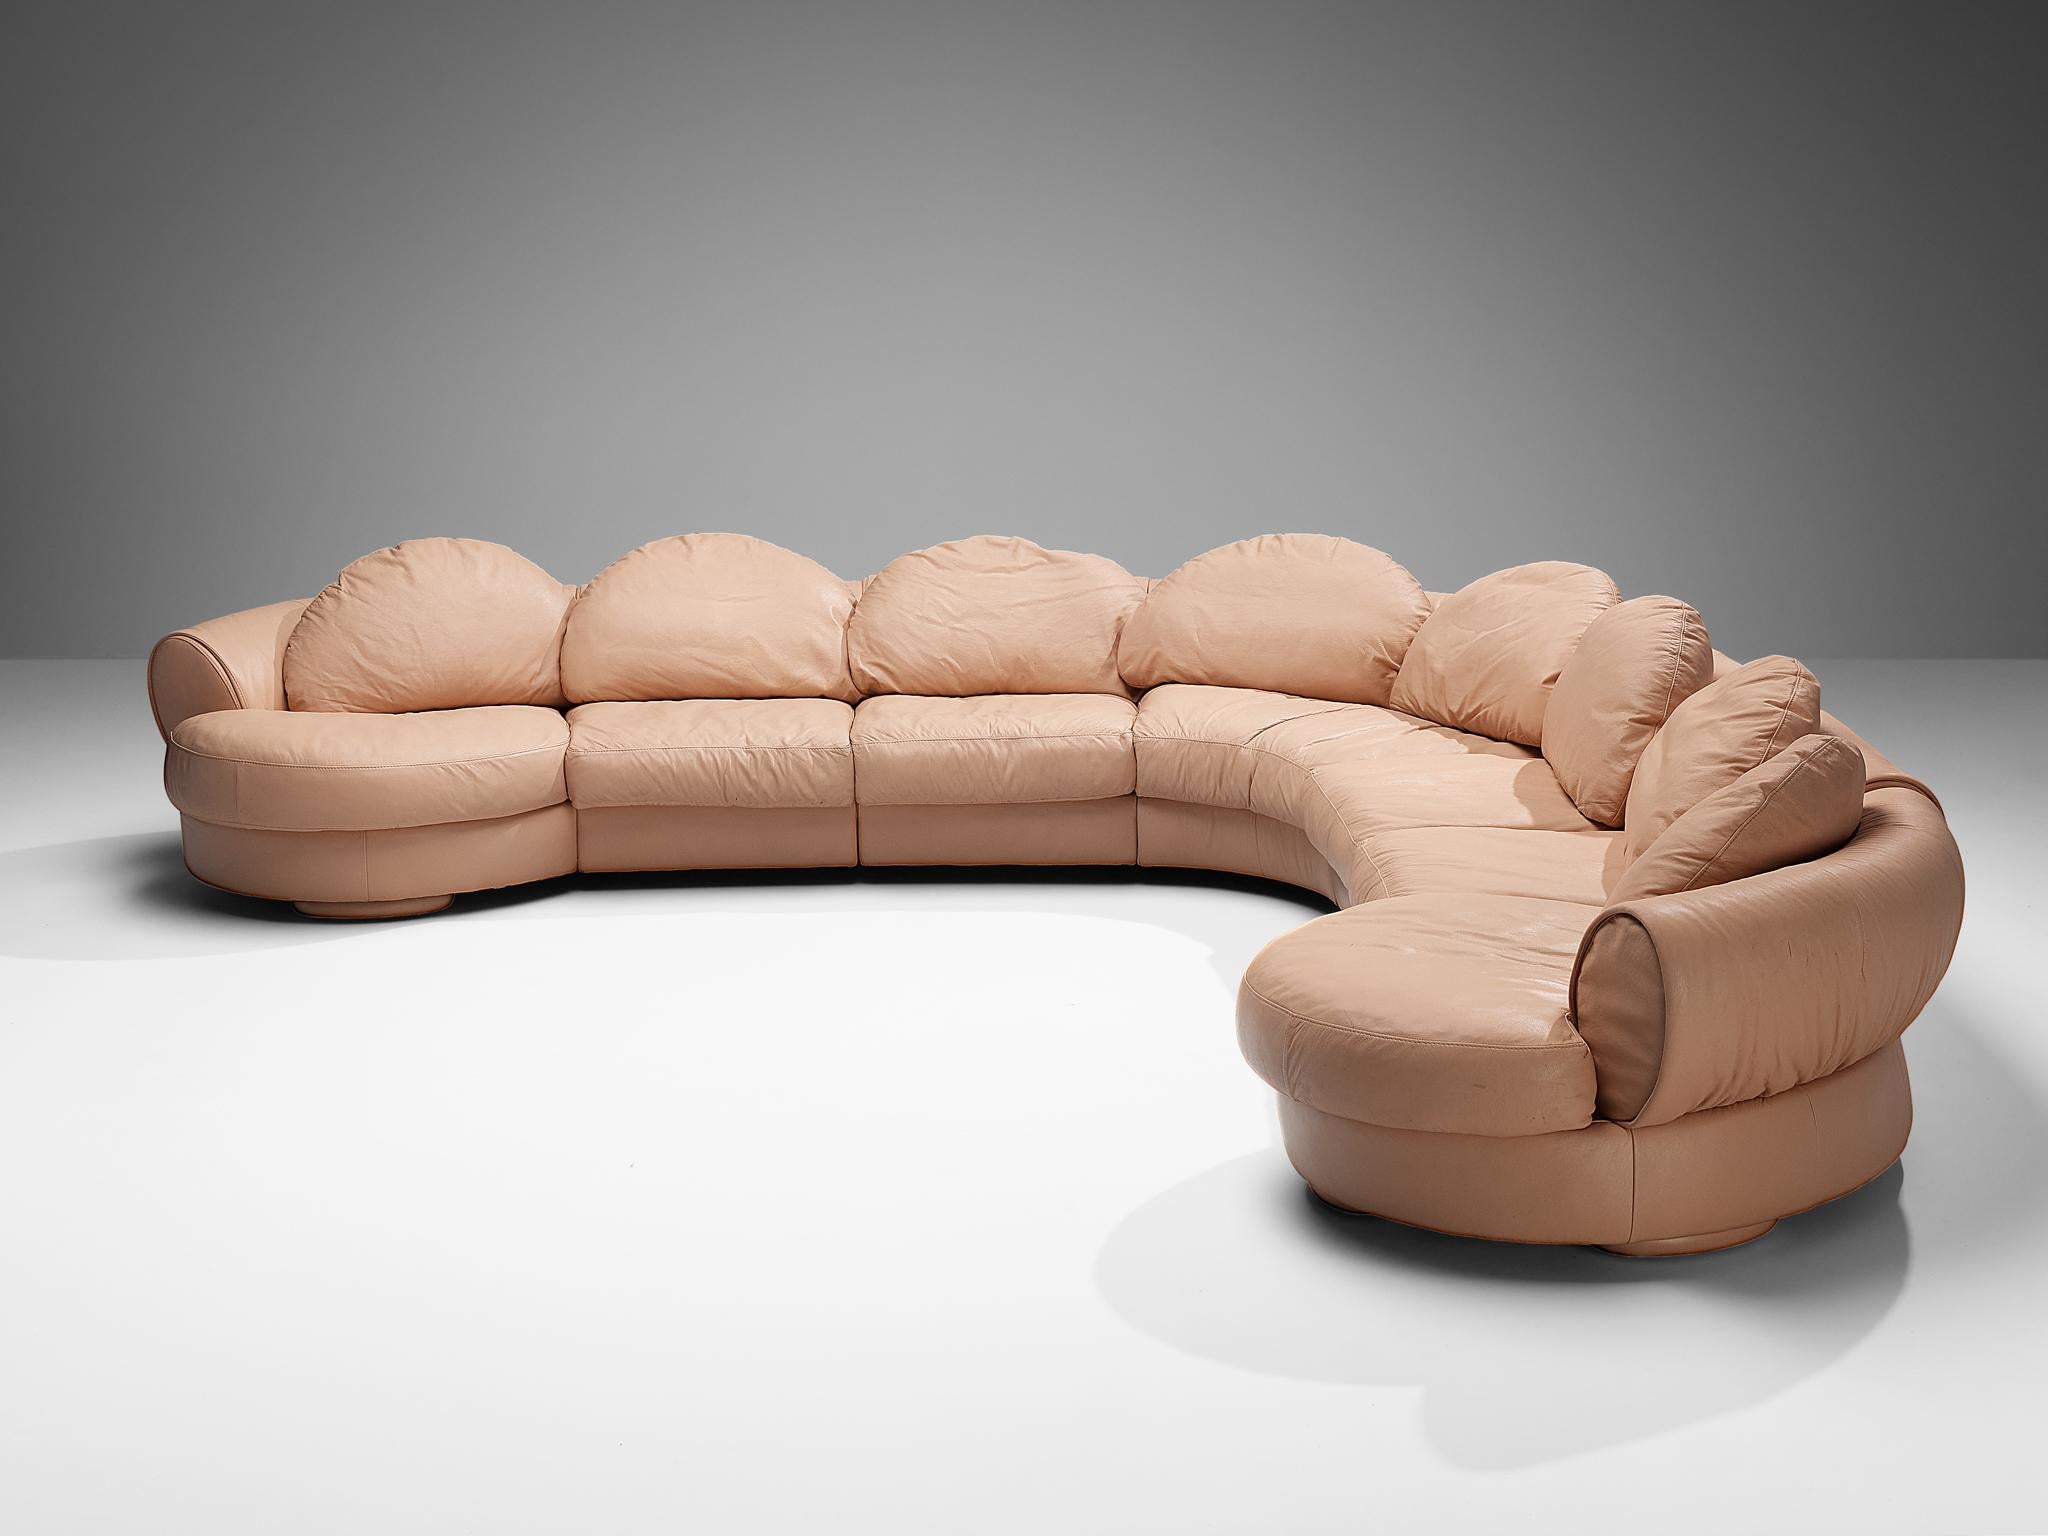 Wiener Werkstätte 'Attributed' Sectional Sofa in Pink Orange Leather  For Sale 2